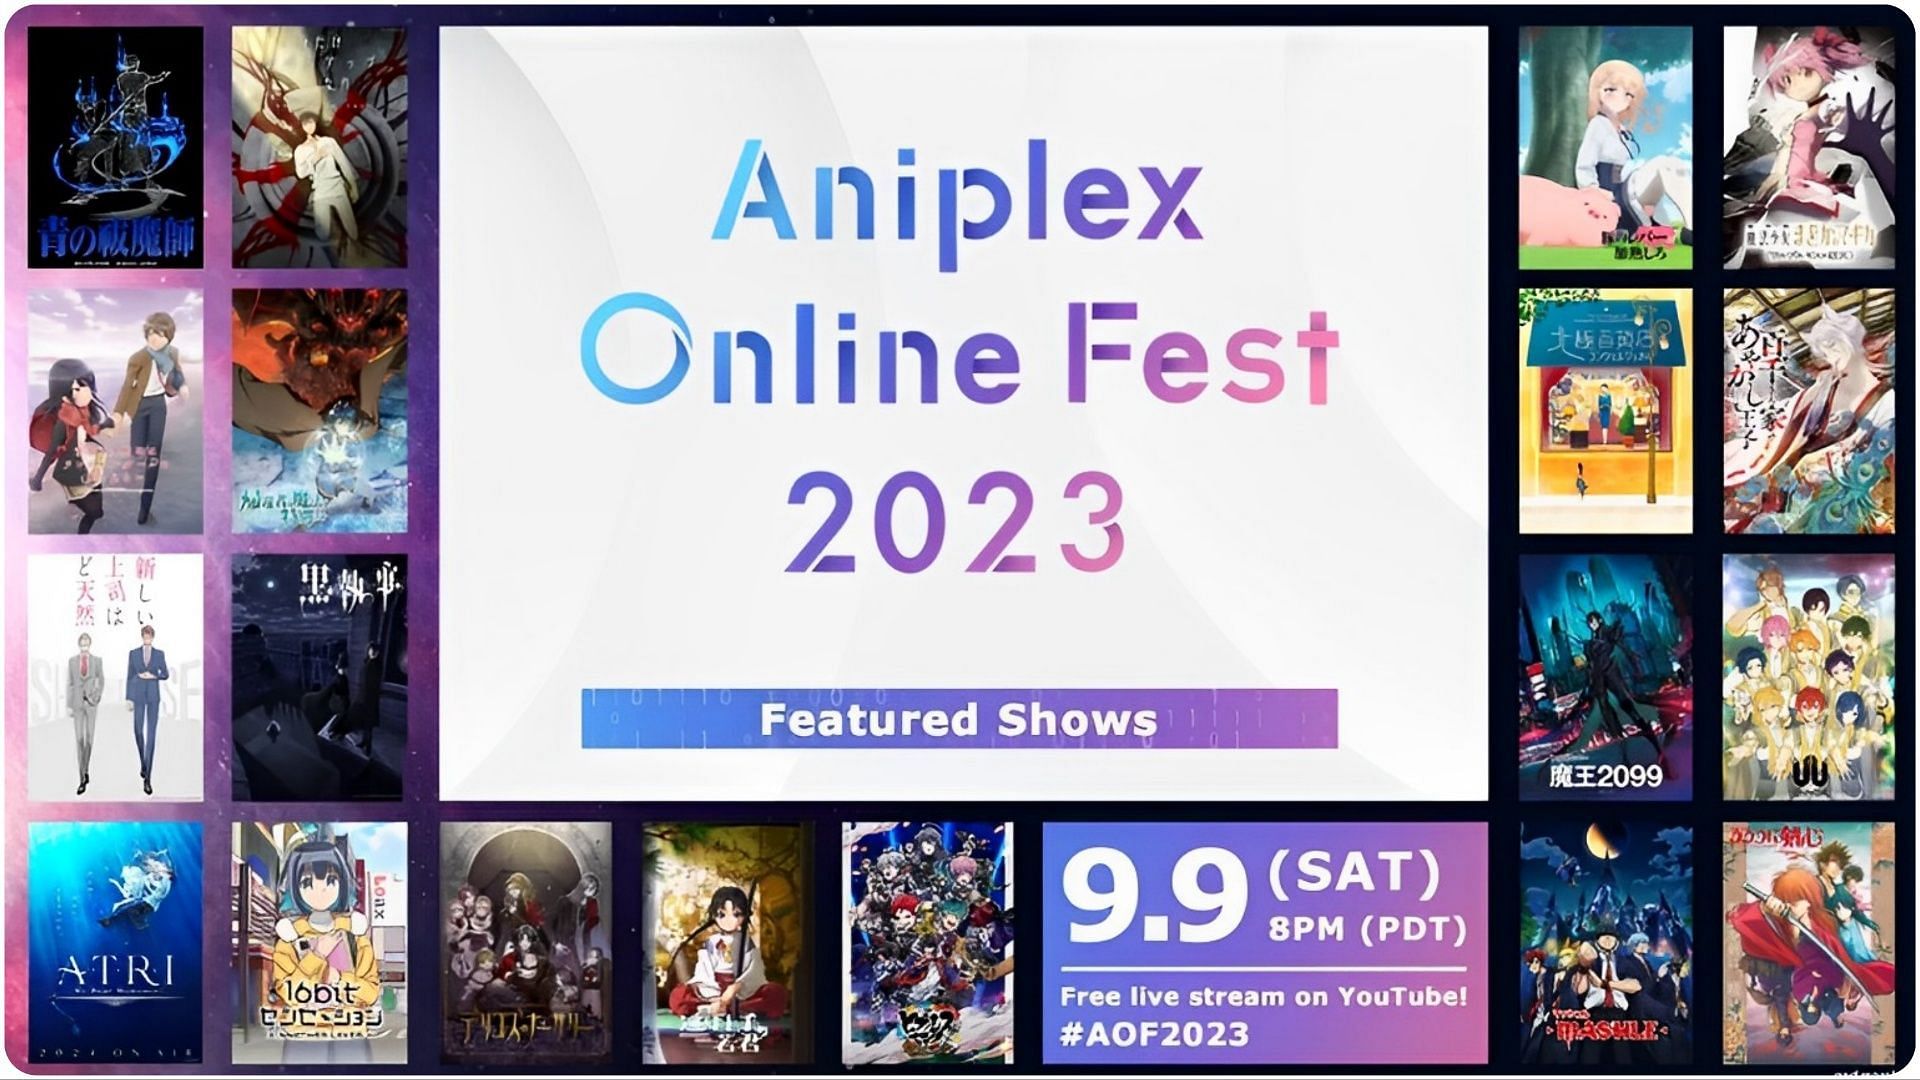 Aniplex Online Fest 2023: All important announcements to expect